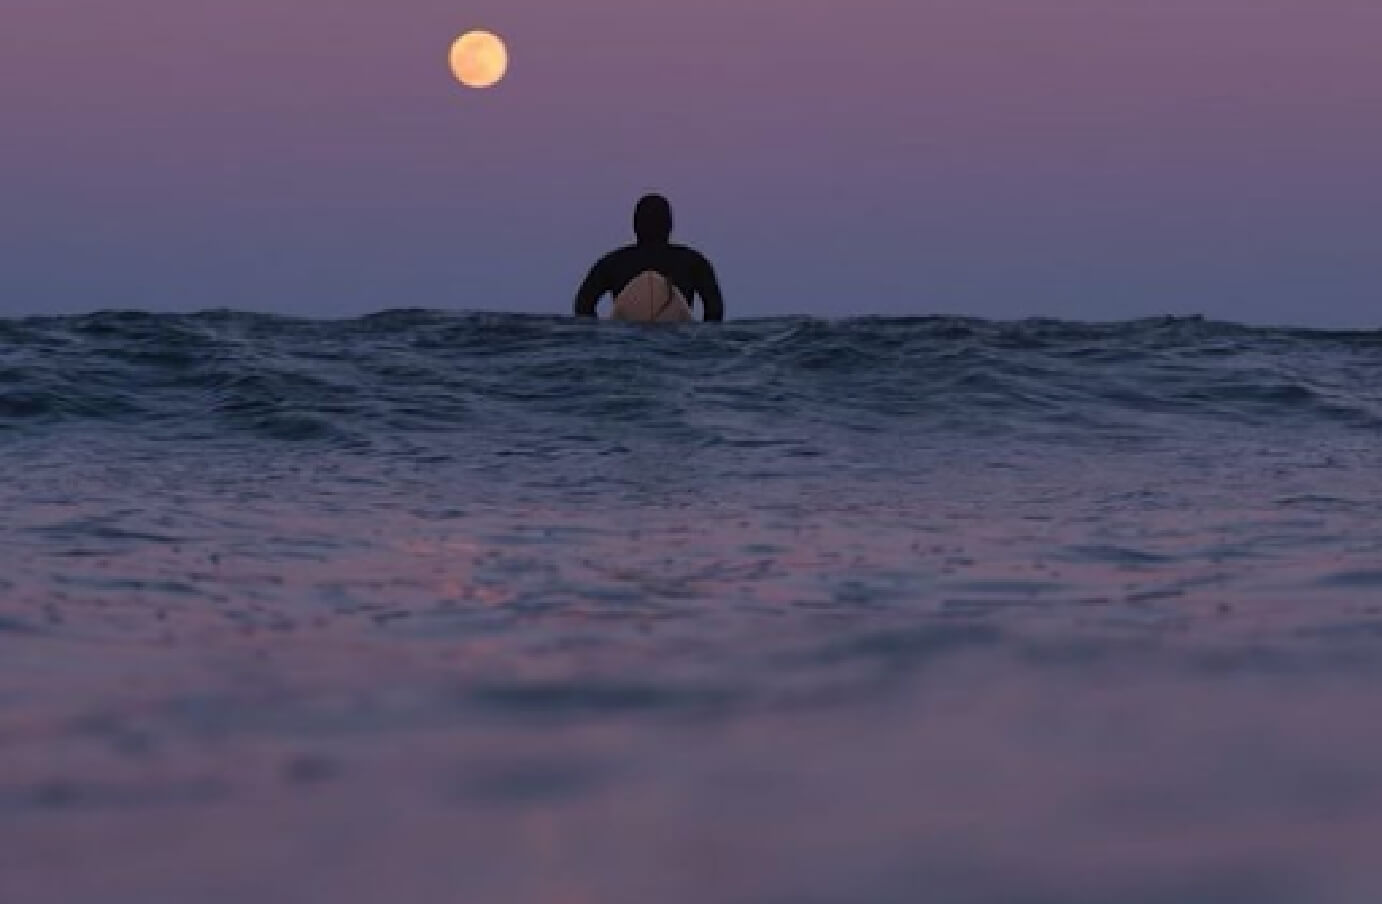 Sunset photography of a srufer on the water, looking out at a moon rising